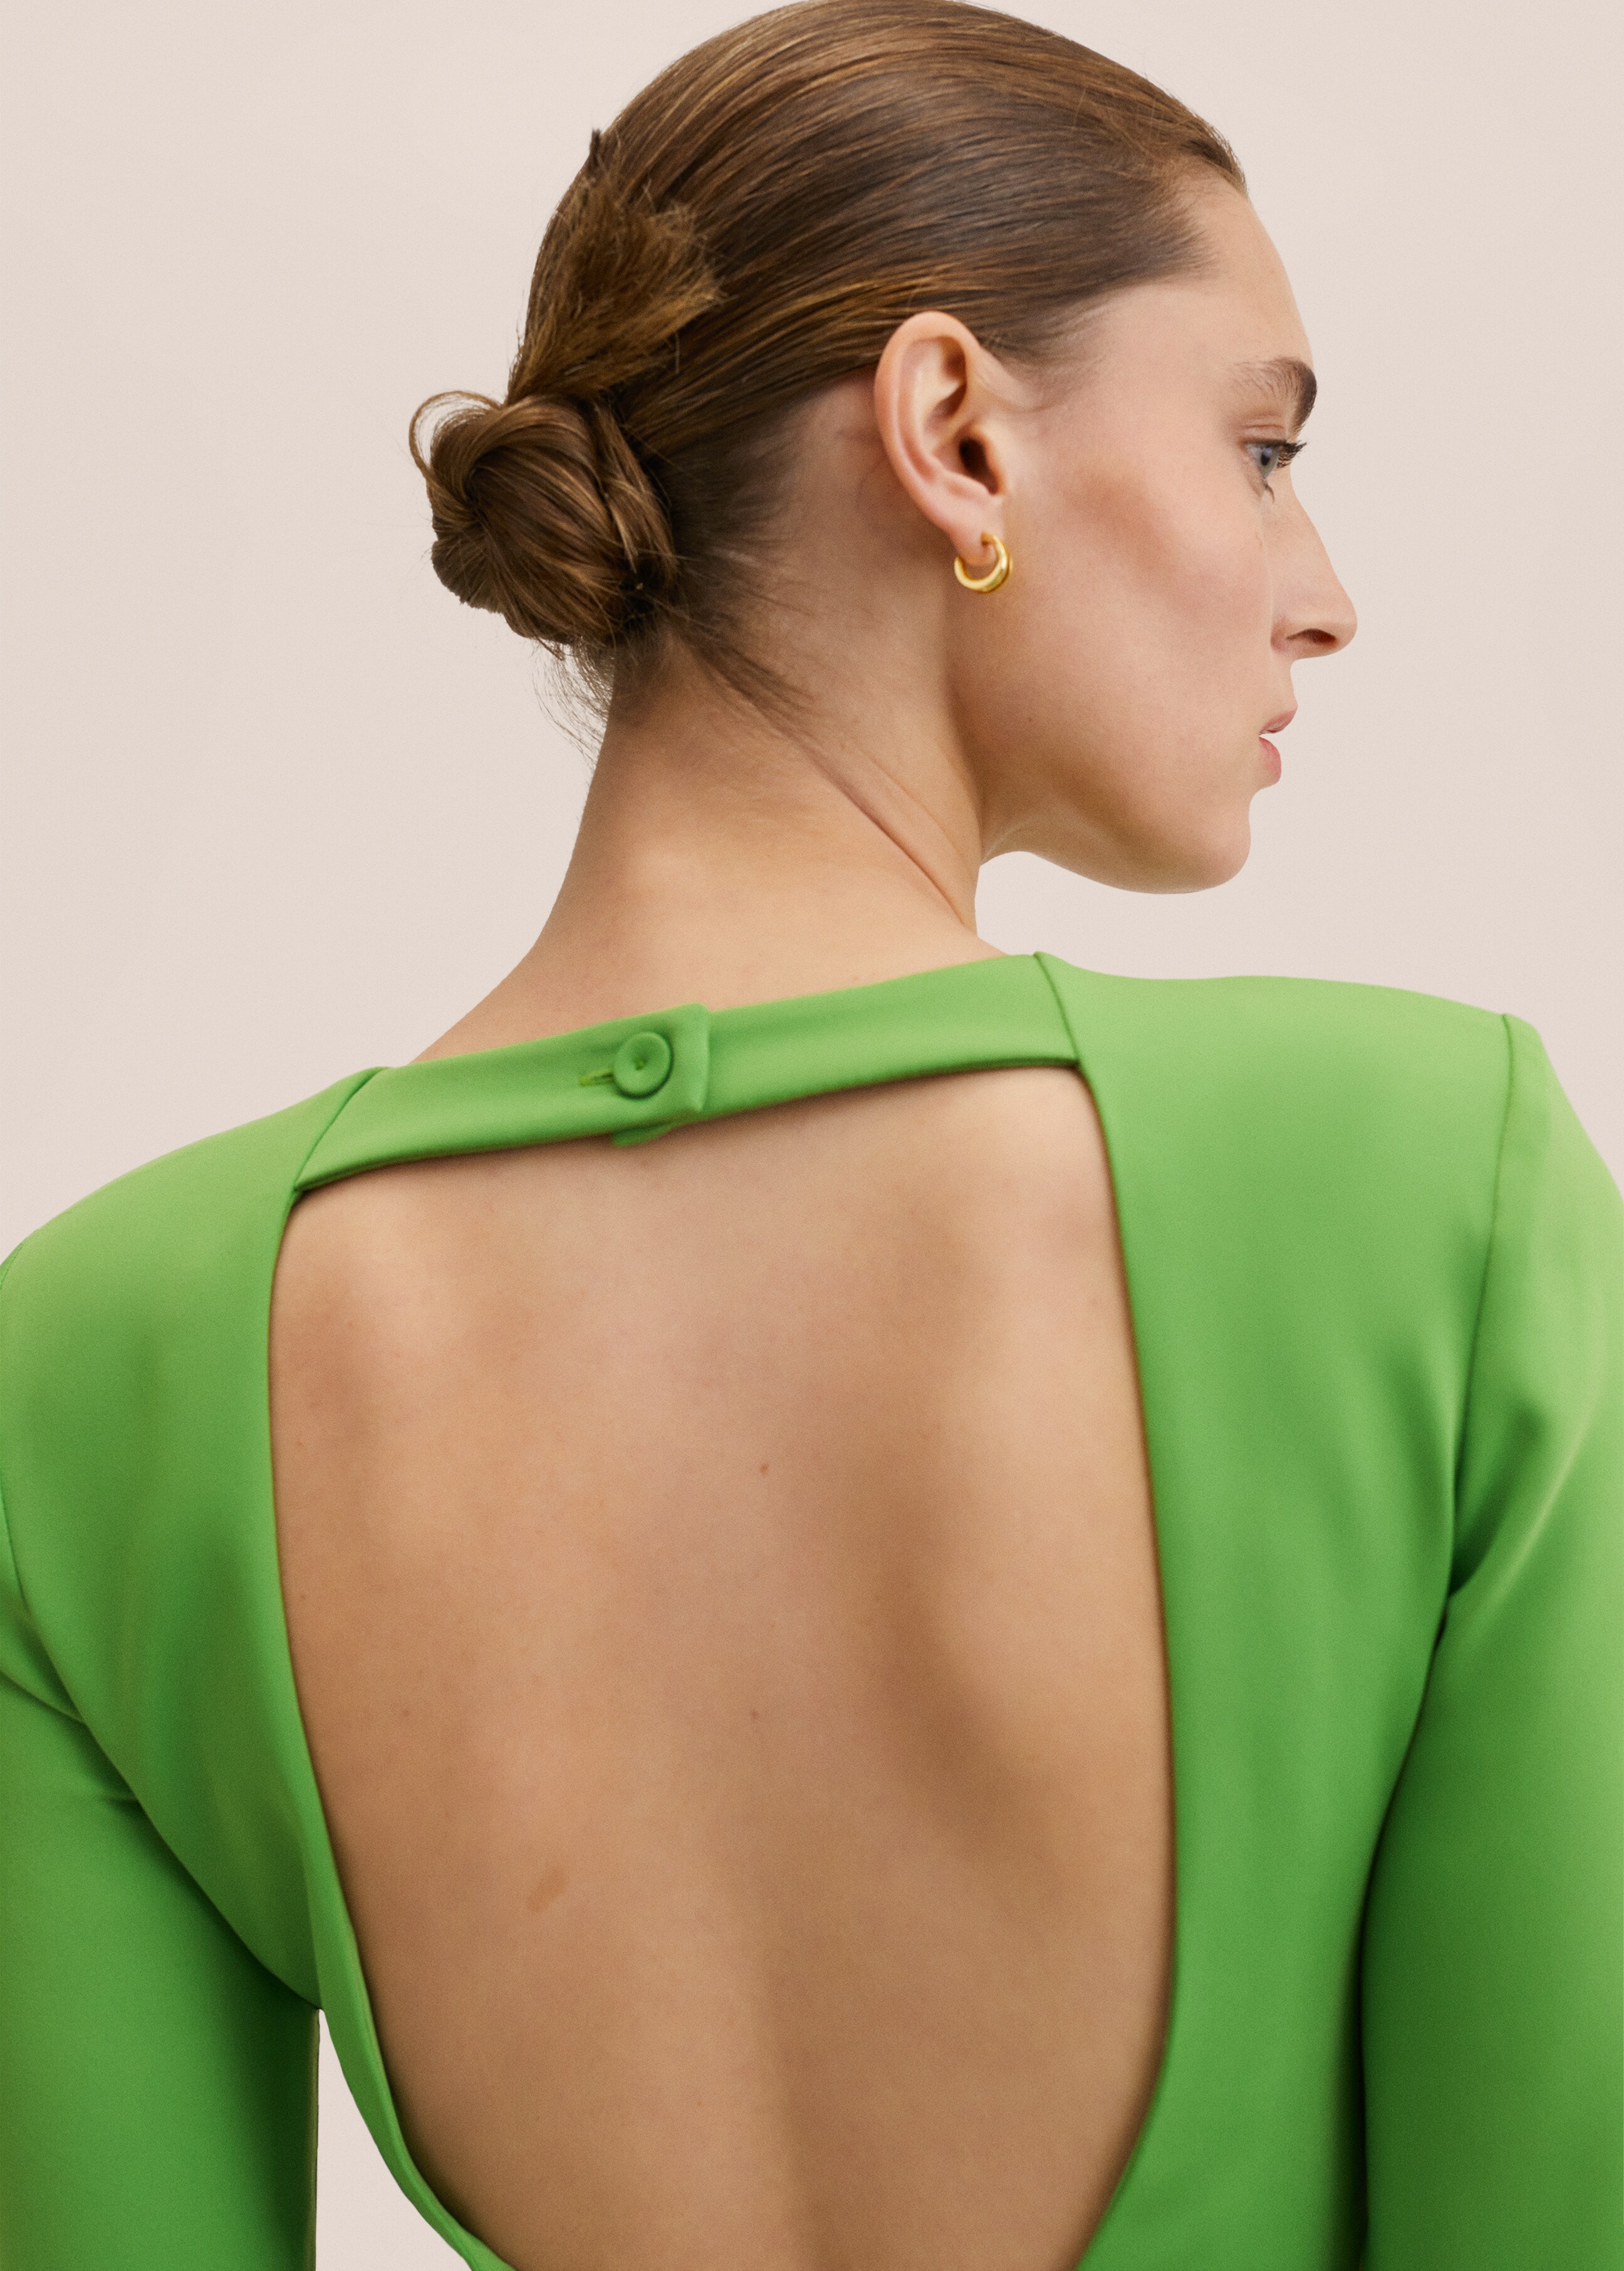 Cut-out back dress - Details of the article 1